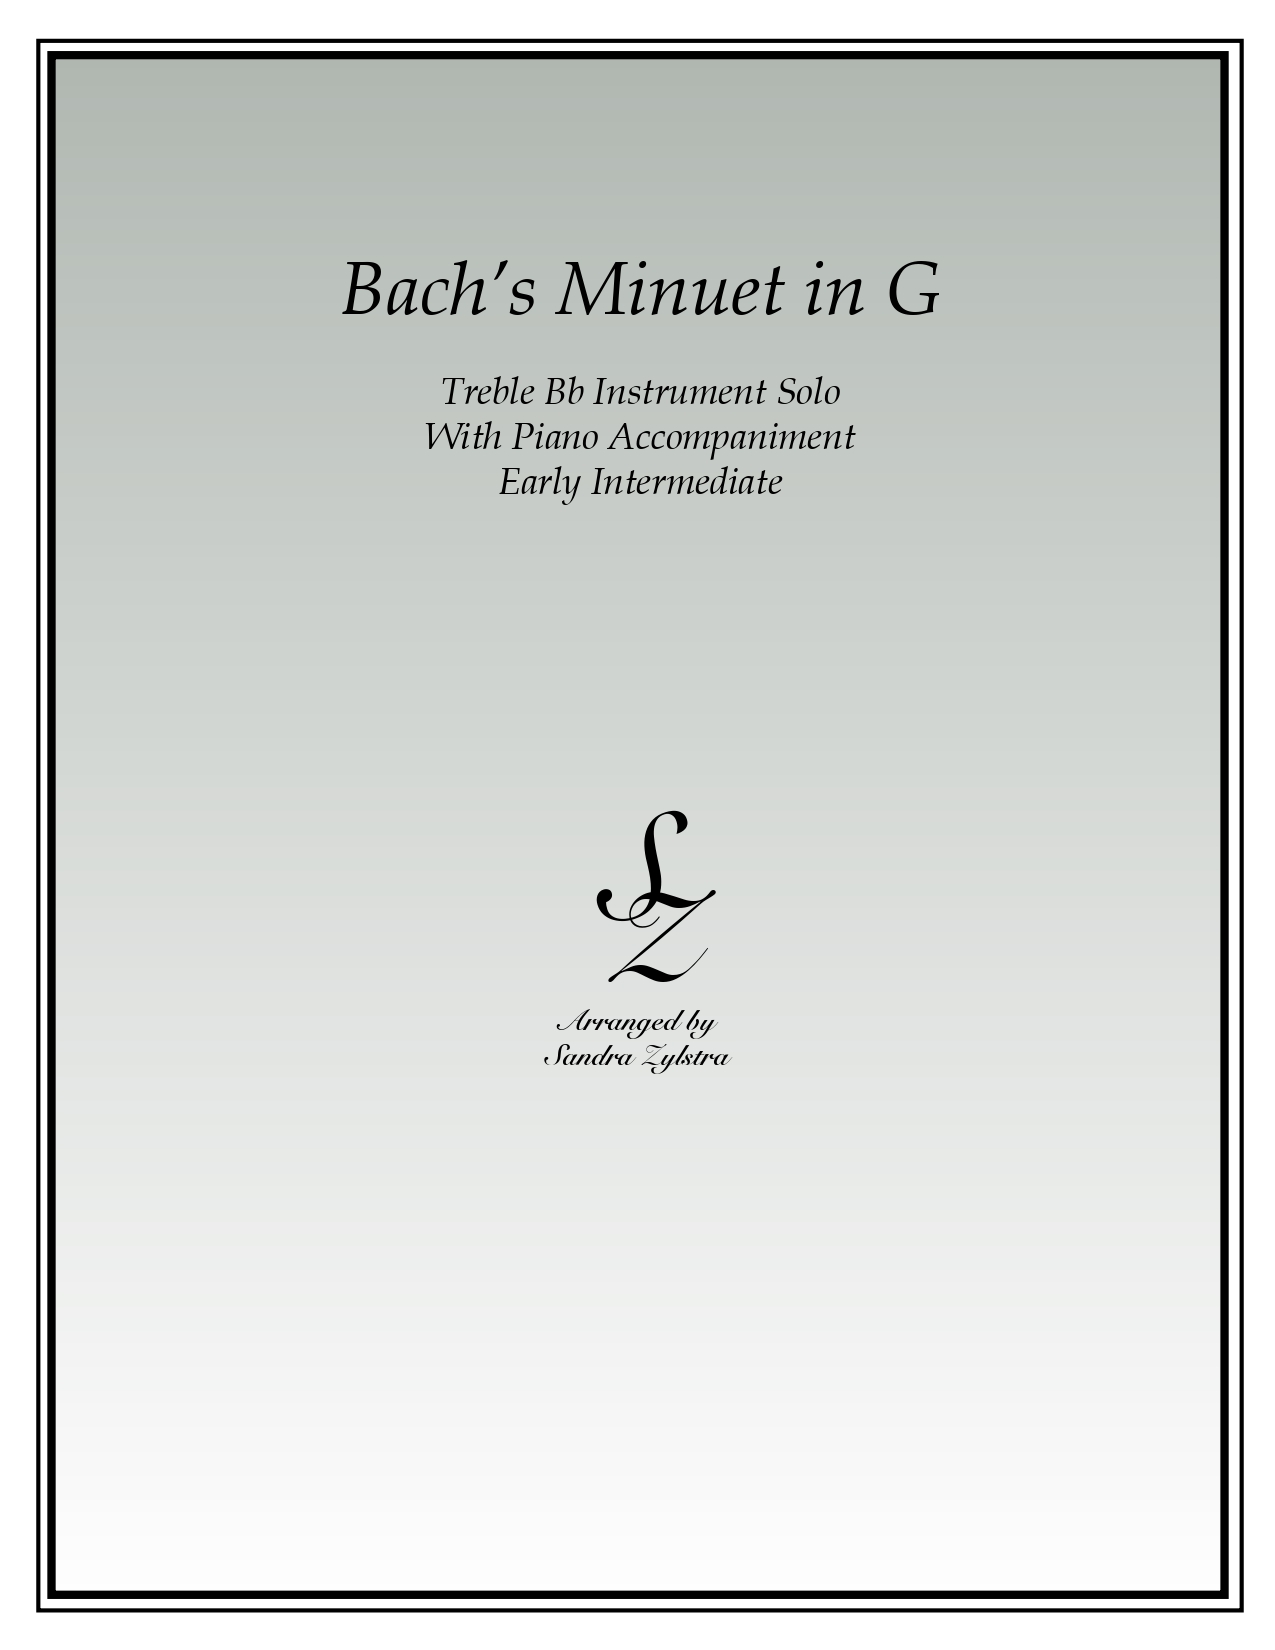 Bachs Minuet In G Bb instrument solo part cover page 00011